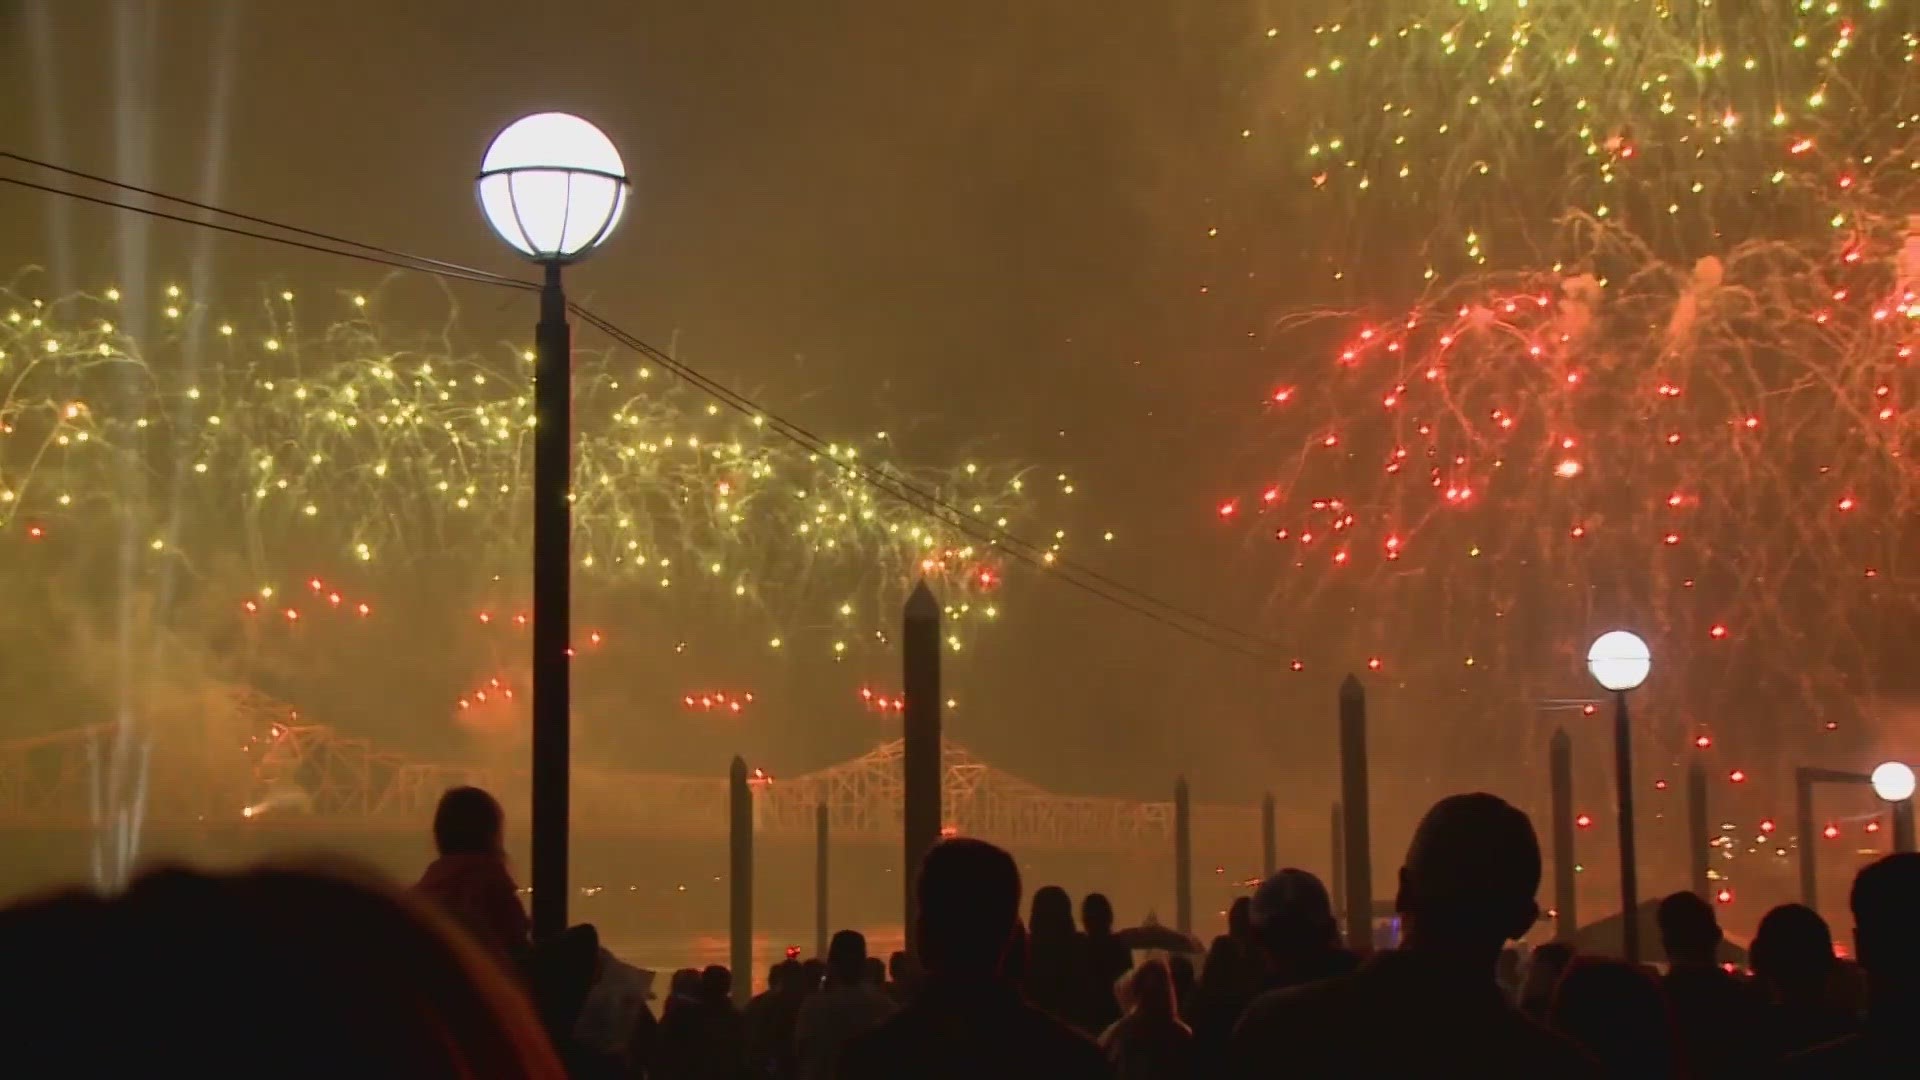 This year's Thunder Over Louisville theme is "Through the Decades."